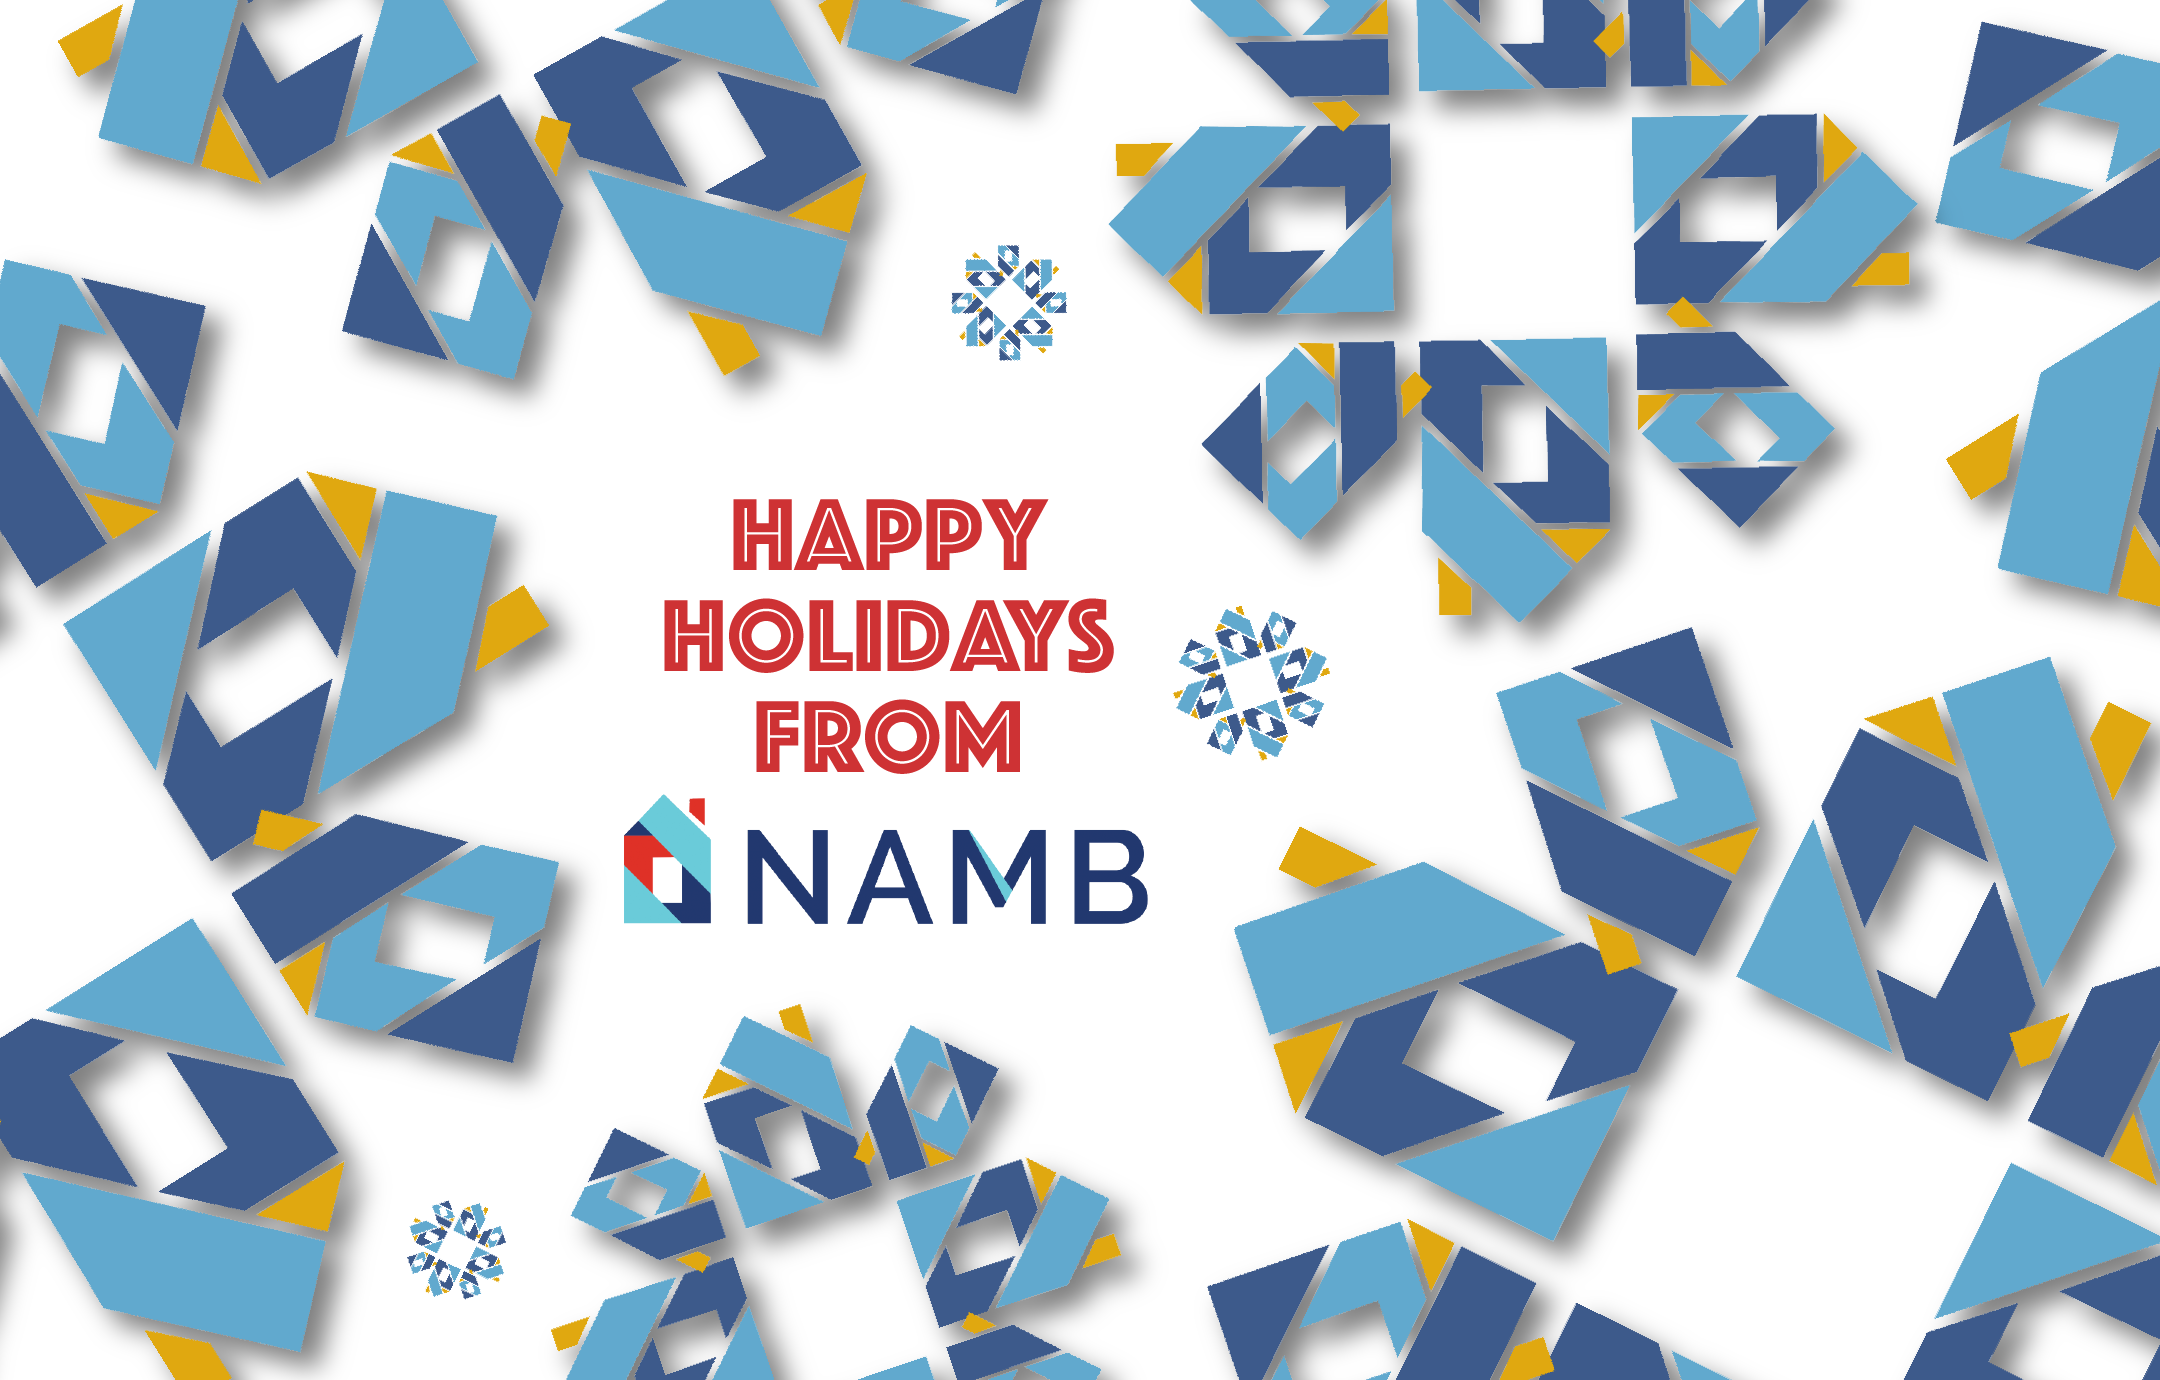 National Association of Mortgage Brokers' holiday card